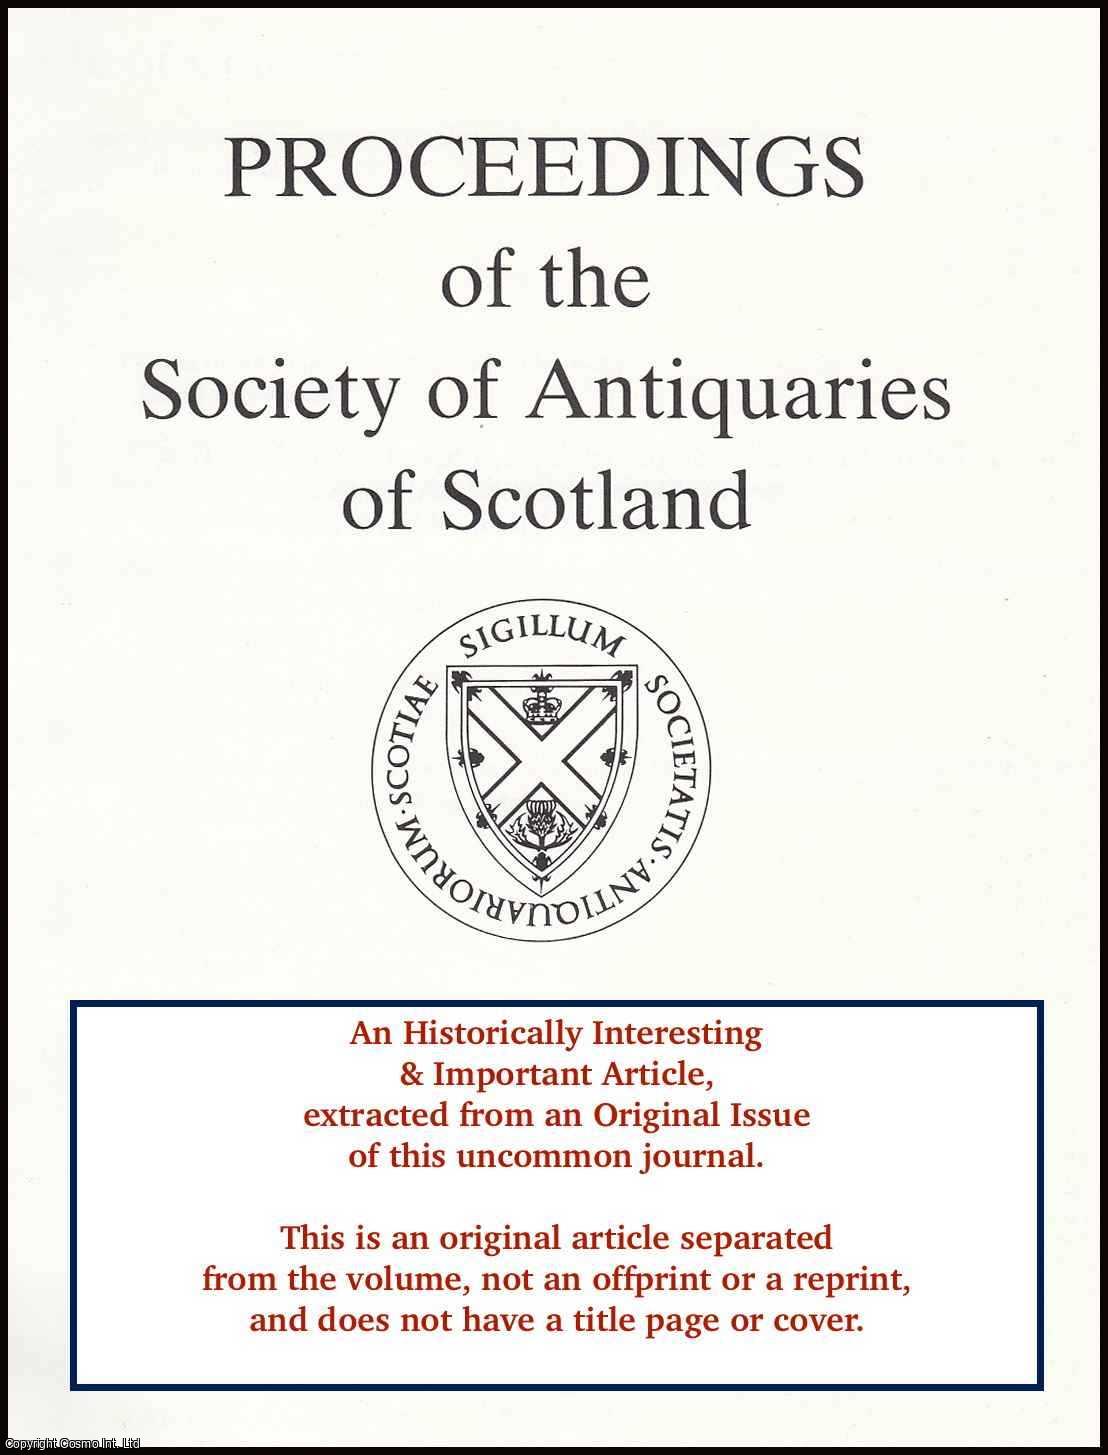 B.A. Crone - Crannogs and Chronologies. An original article from the Proceedings of the Society of Antiquaries of Scotland, 1993.